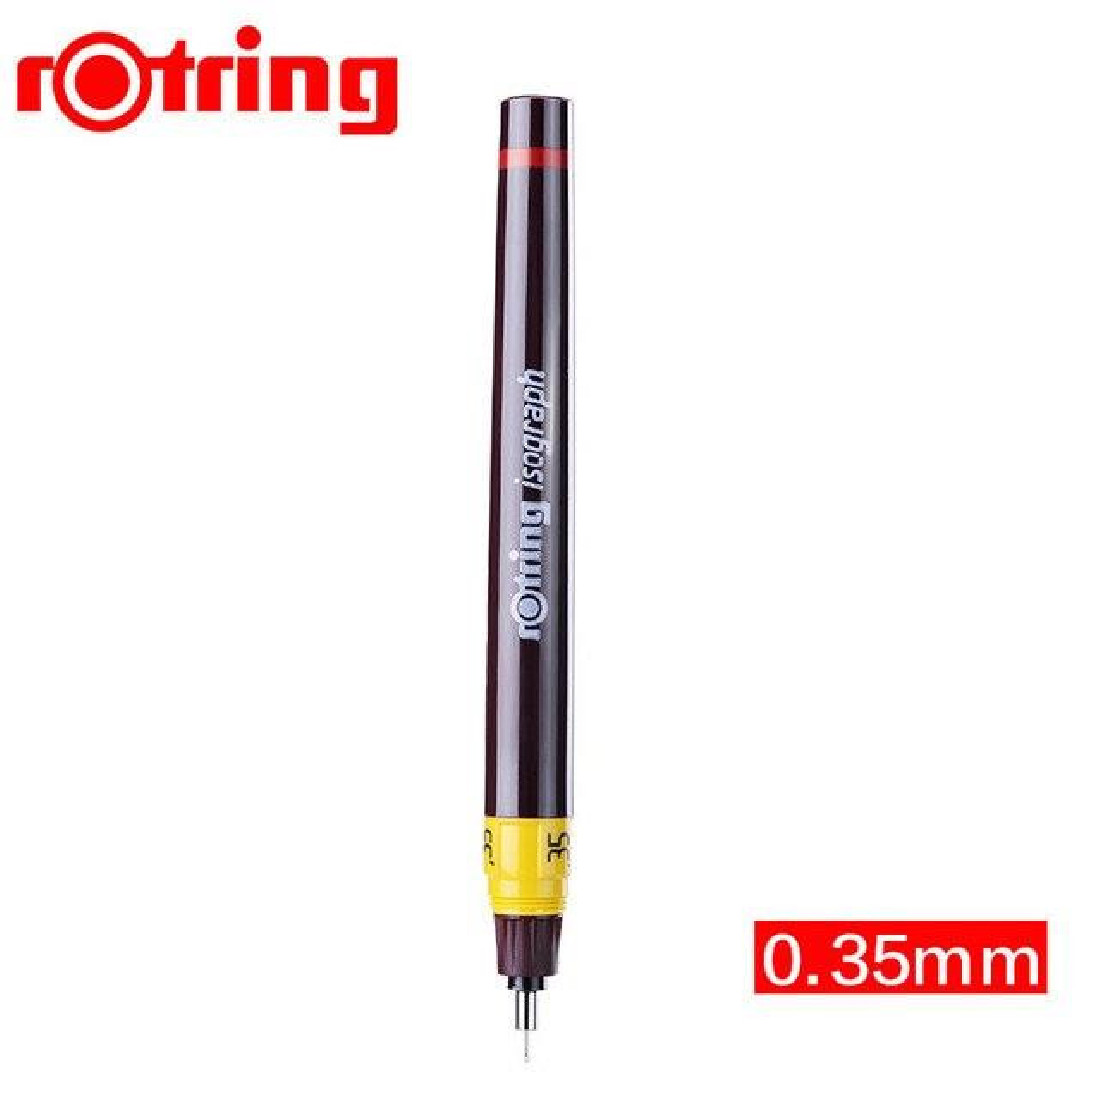 Rotring Isograph pen 0,35mm